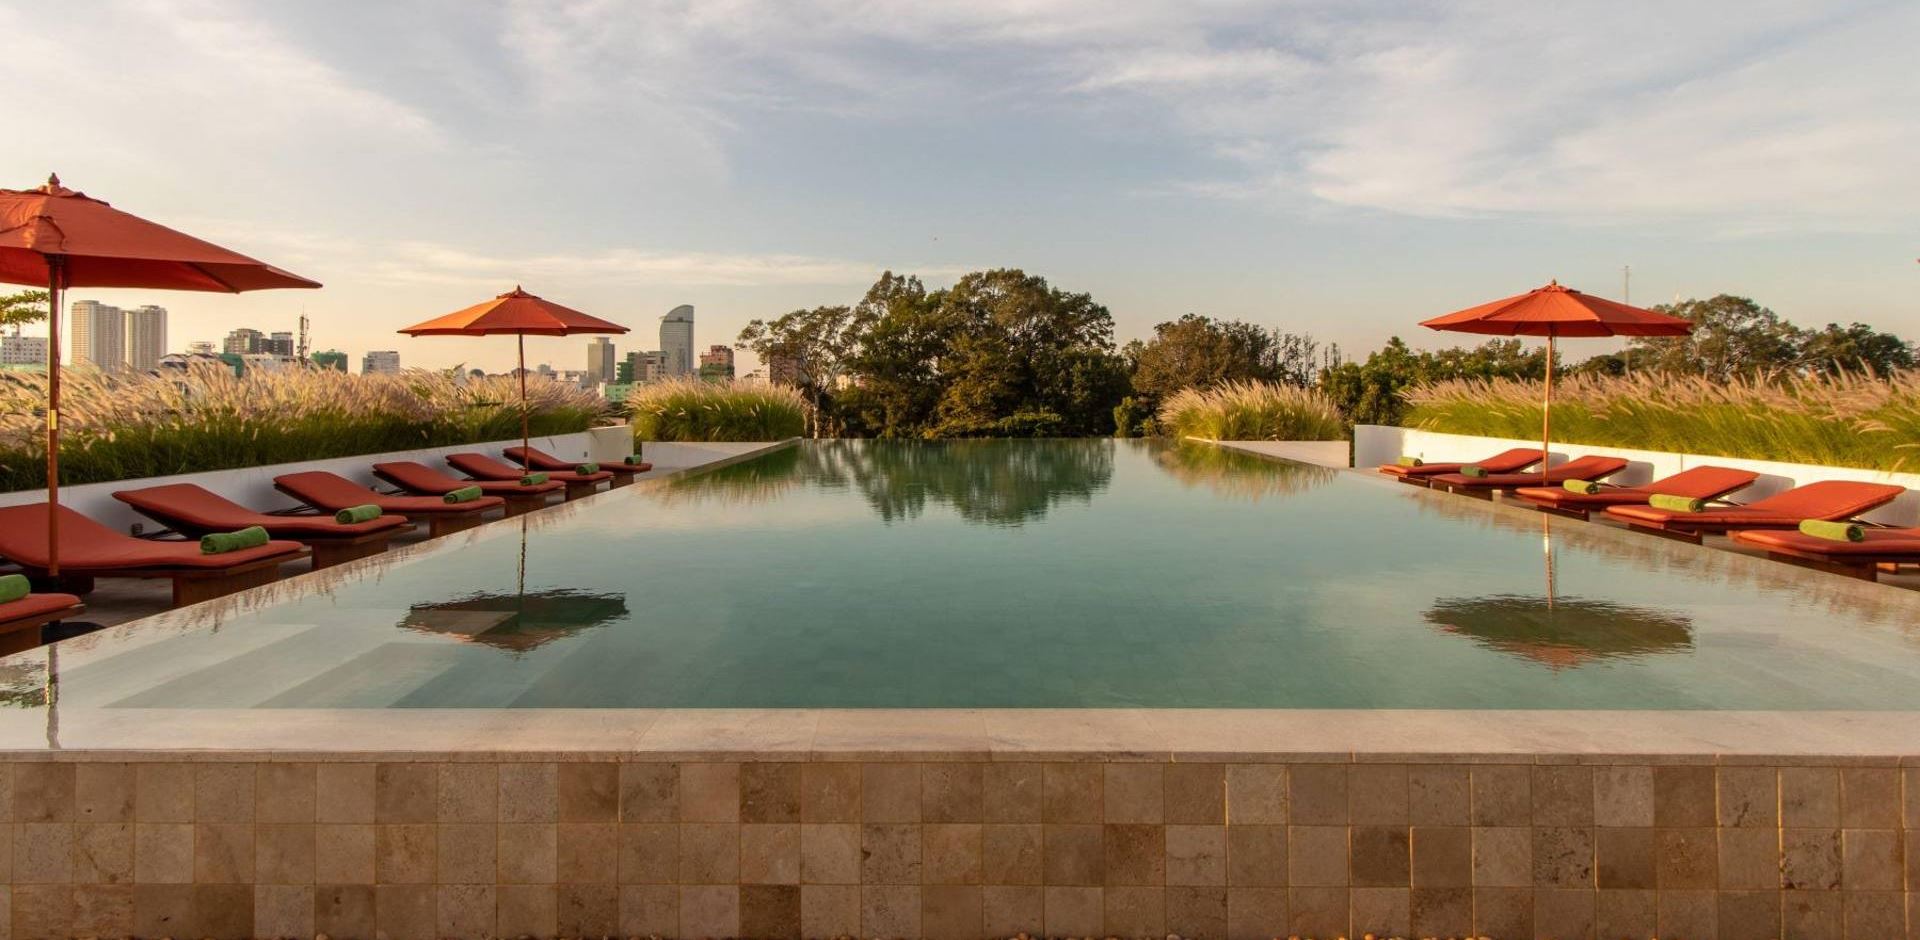 Cambodia, Phnom Penh, Penh House Hotel, View From Pool